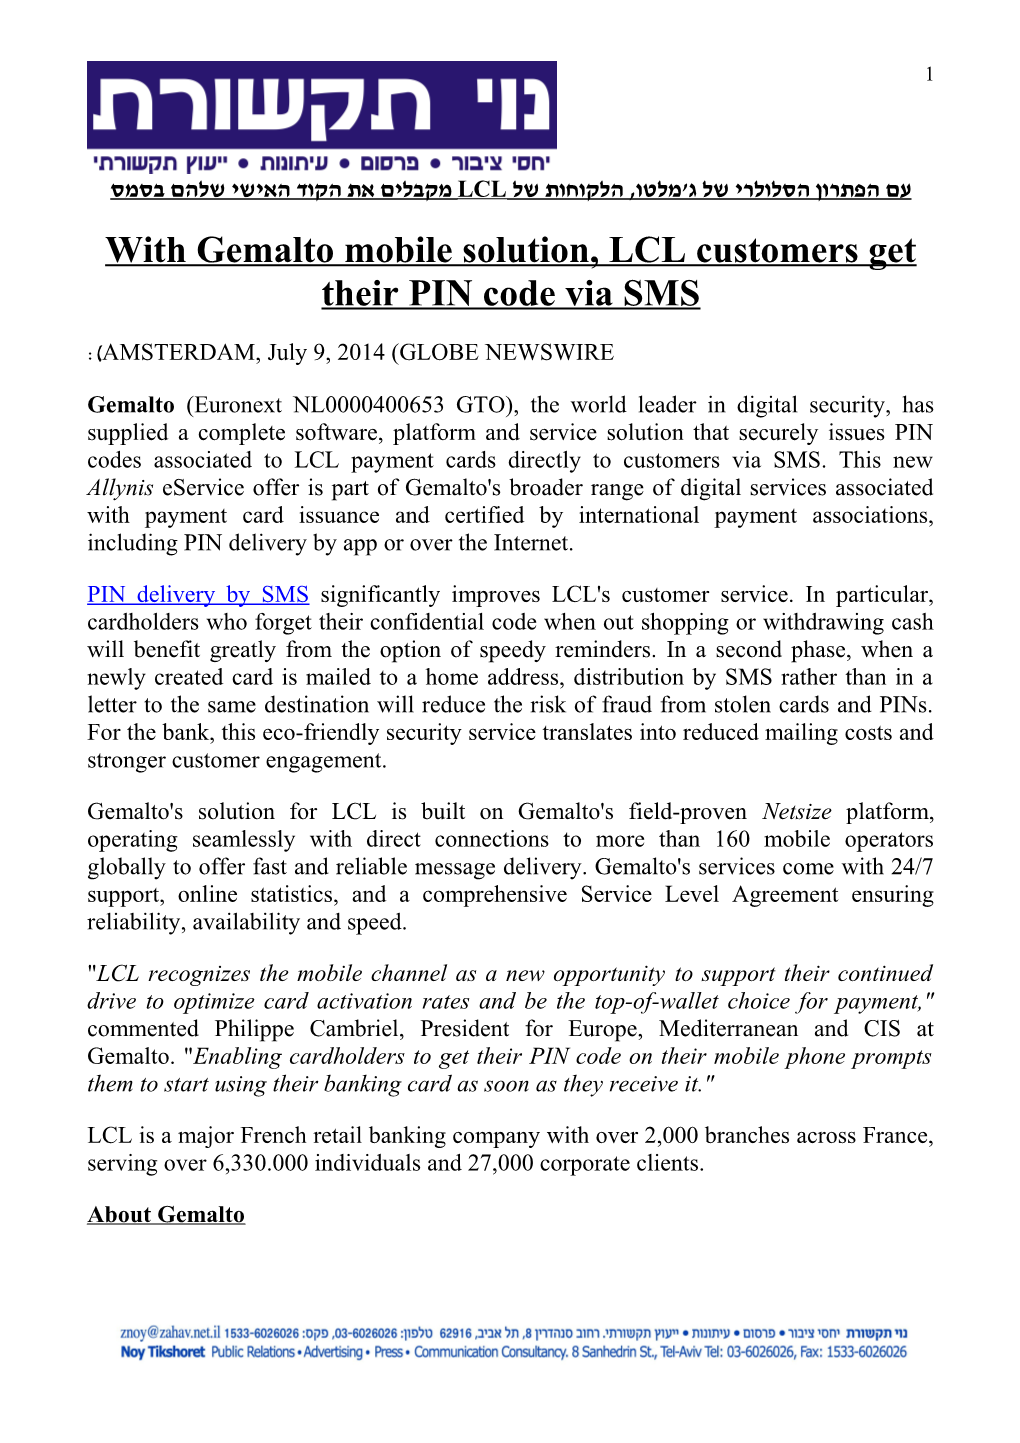 With Gemalto Mobile Solution, LCL Customers Get Their PIN Code Via SMS